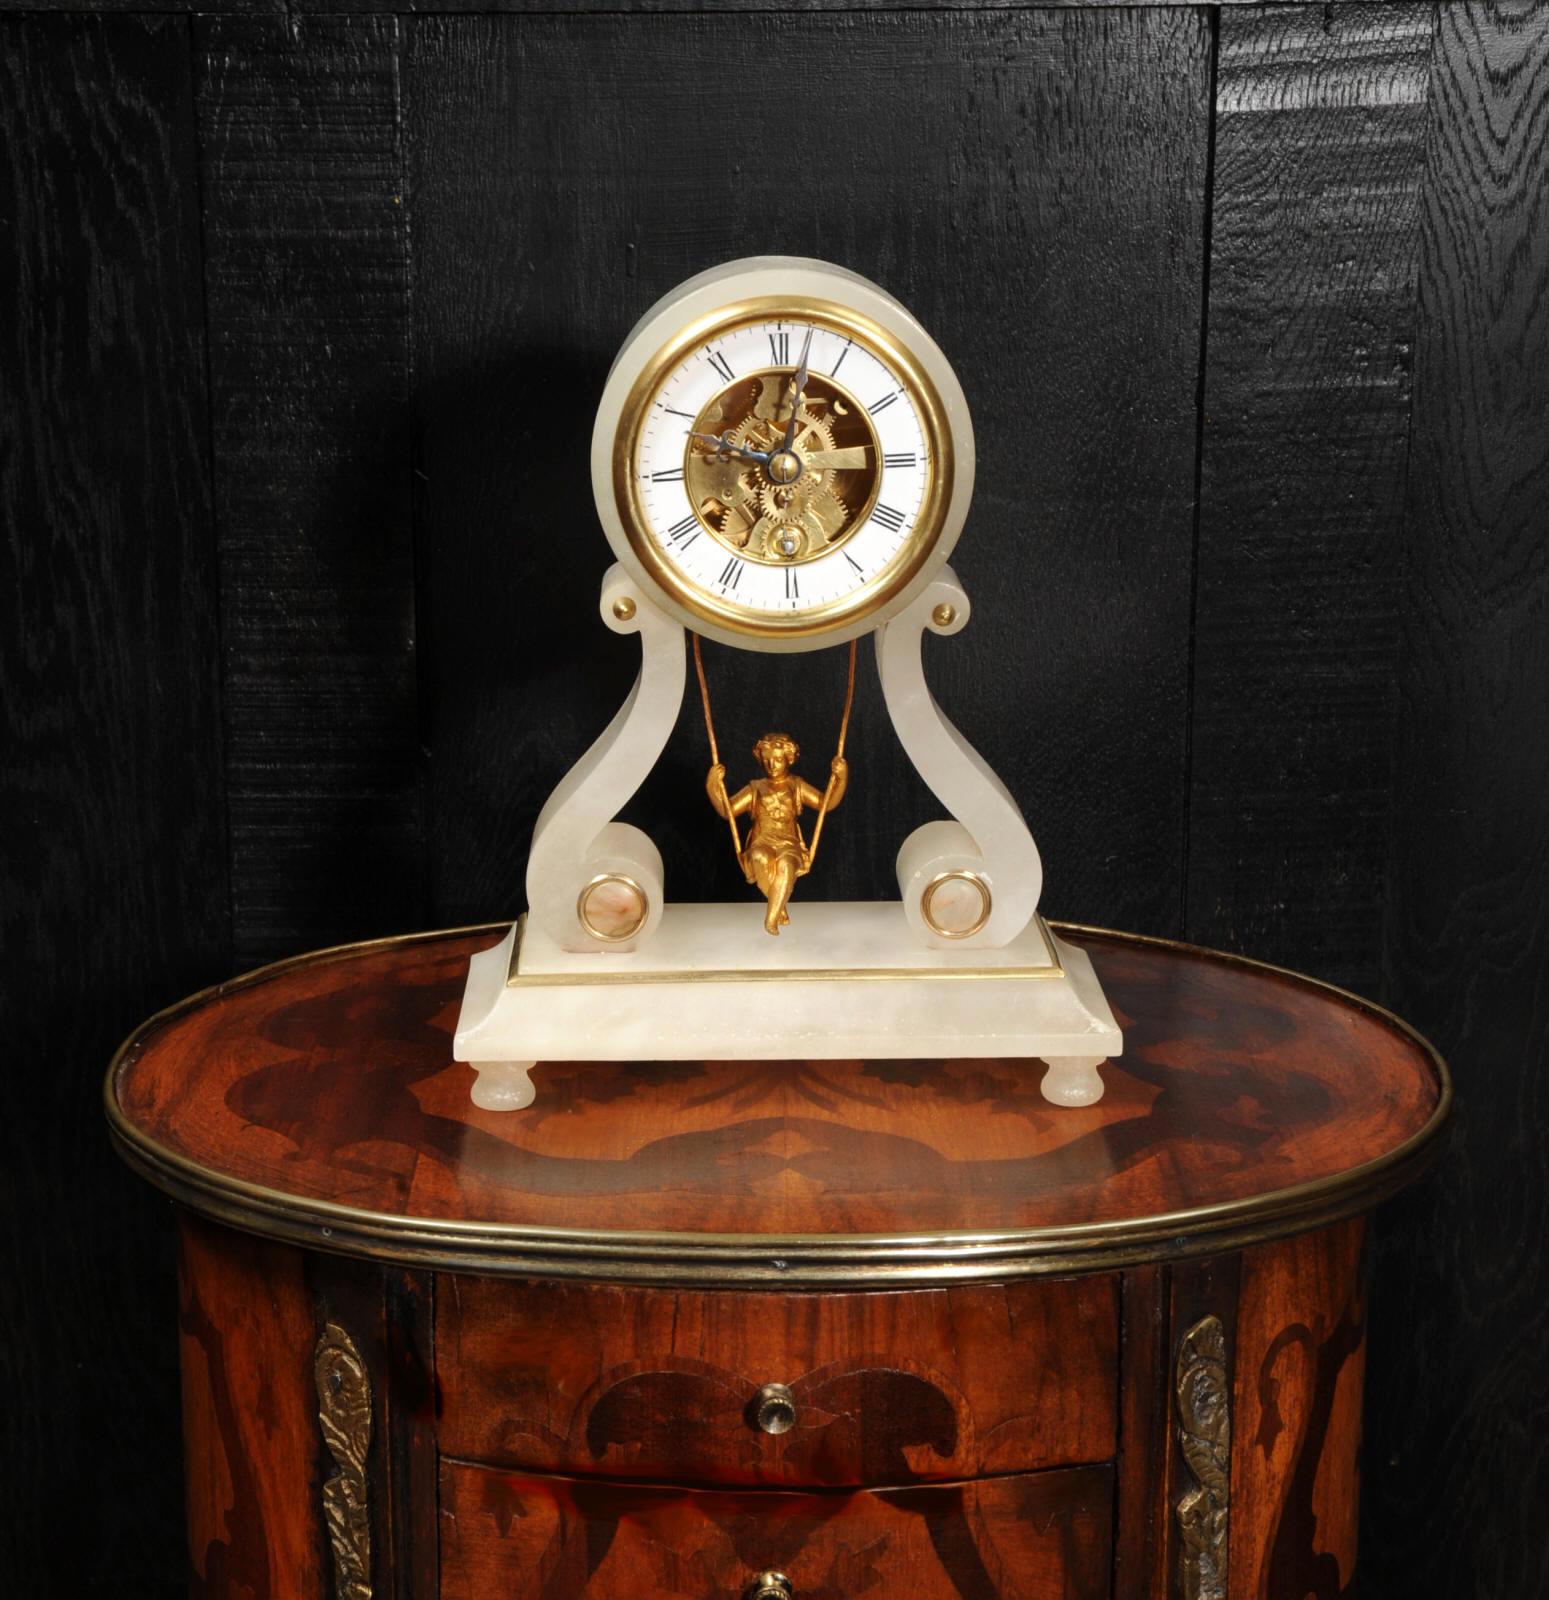 A super, rare original antique French clock featuring a maiden swinging back and forth as the pendulum. This is the Farcot version, the best one, patented by Farcot in 1862. It uses a double escapement with a half moon pallet to achieve the front to